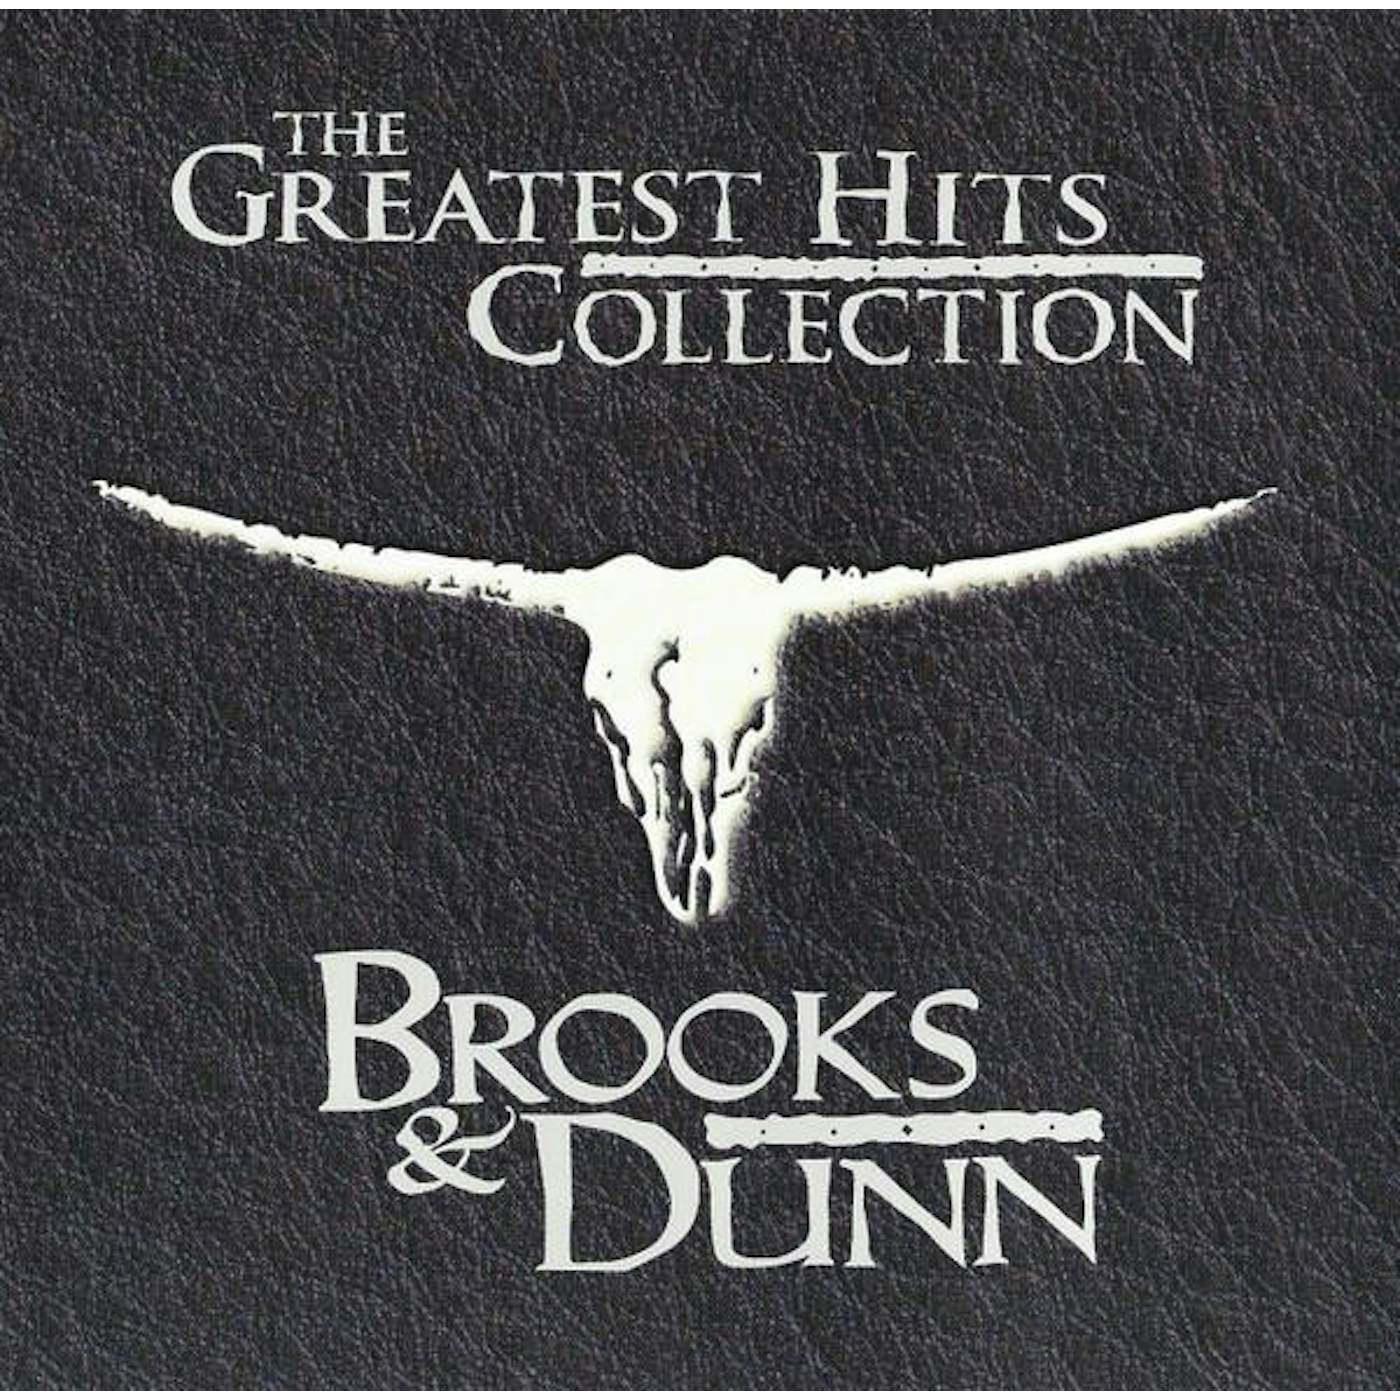 Brooks & Dunn GREATEST HITS COLLECTION () CD